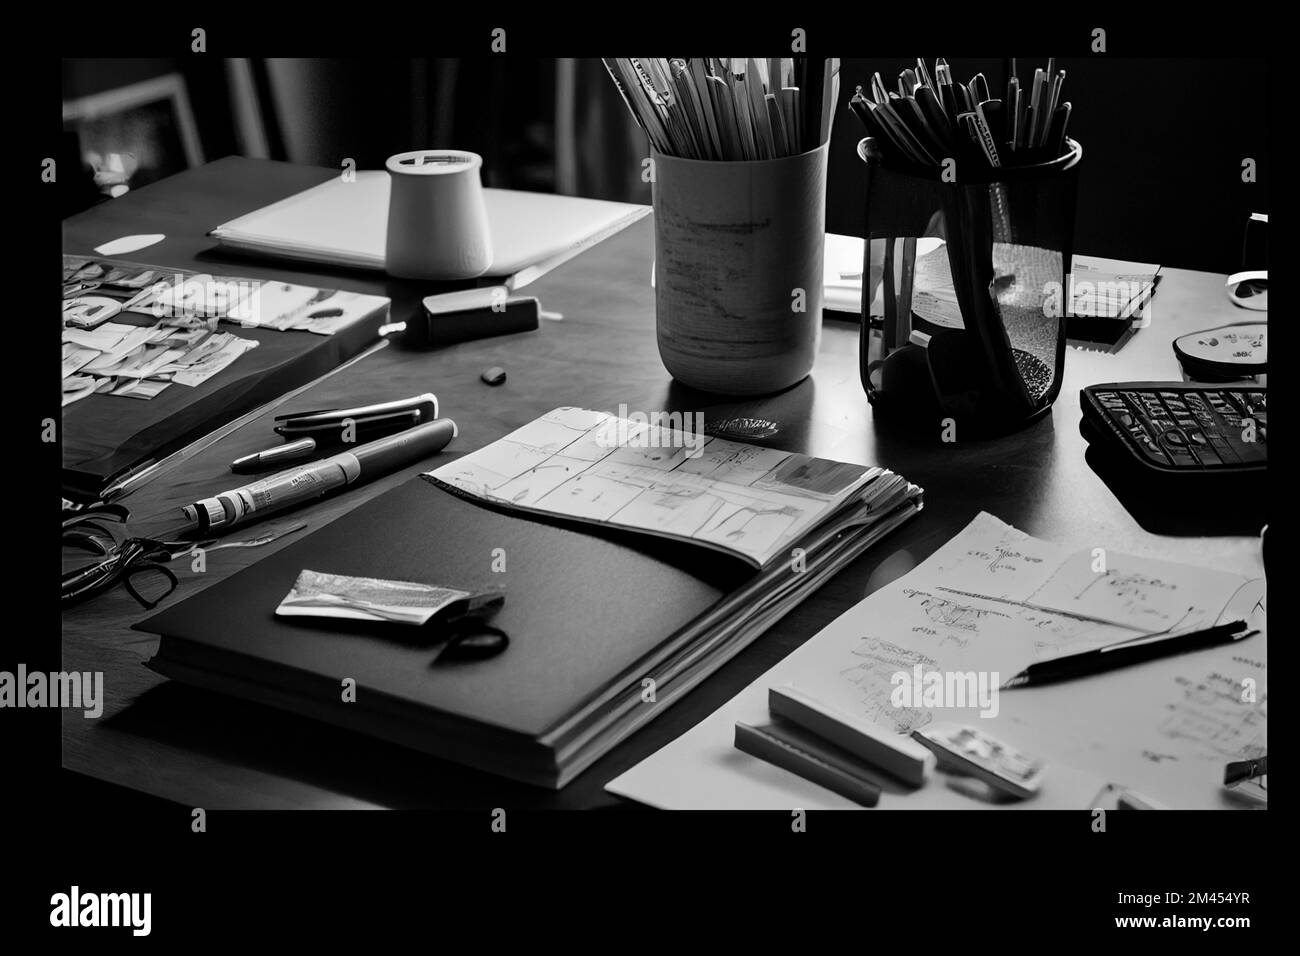 A cluttered desk with pens, papers, and other planning materials ...